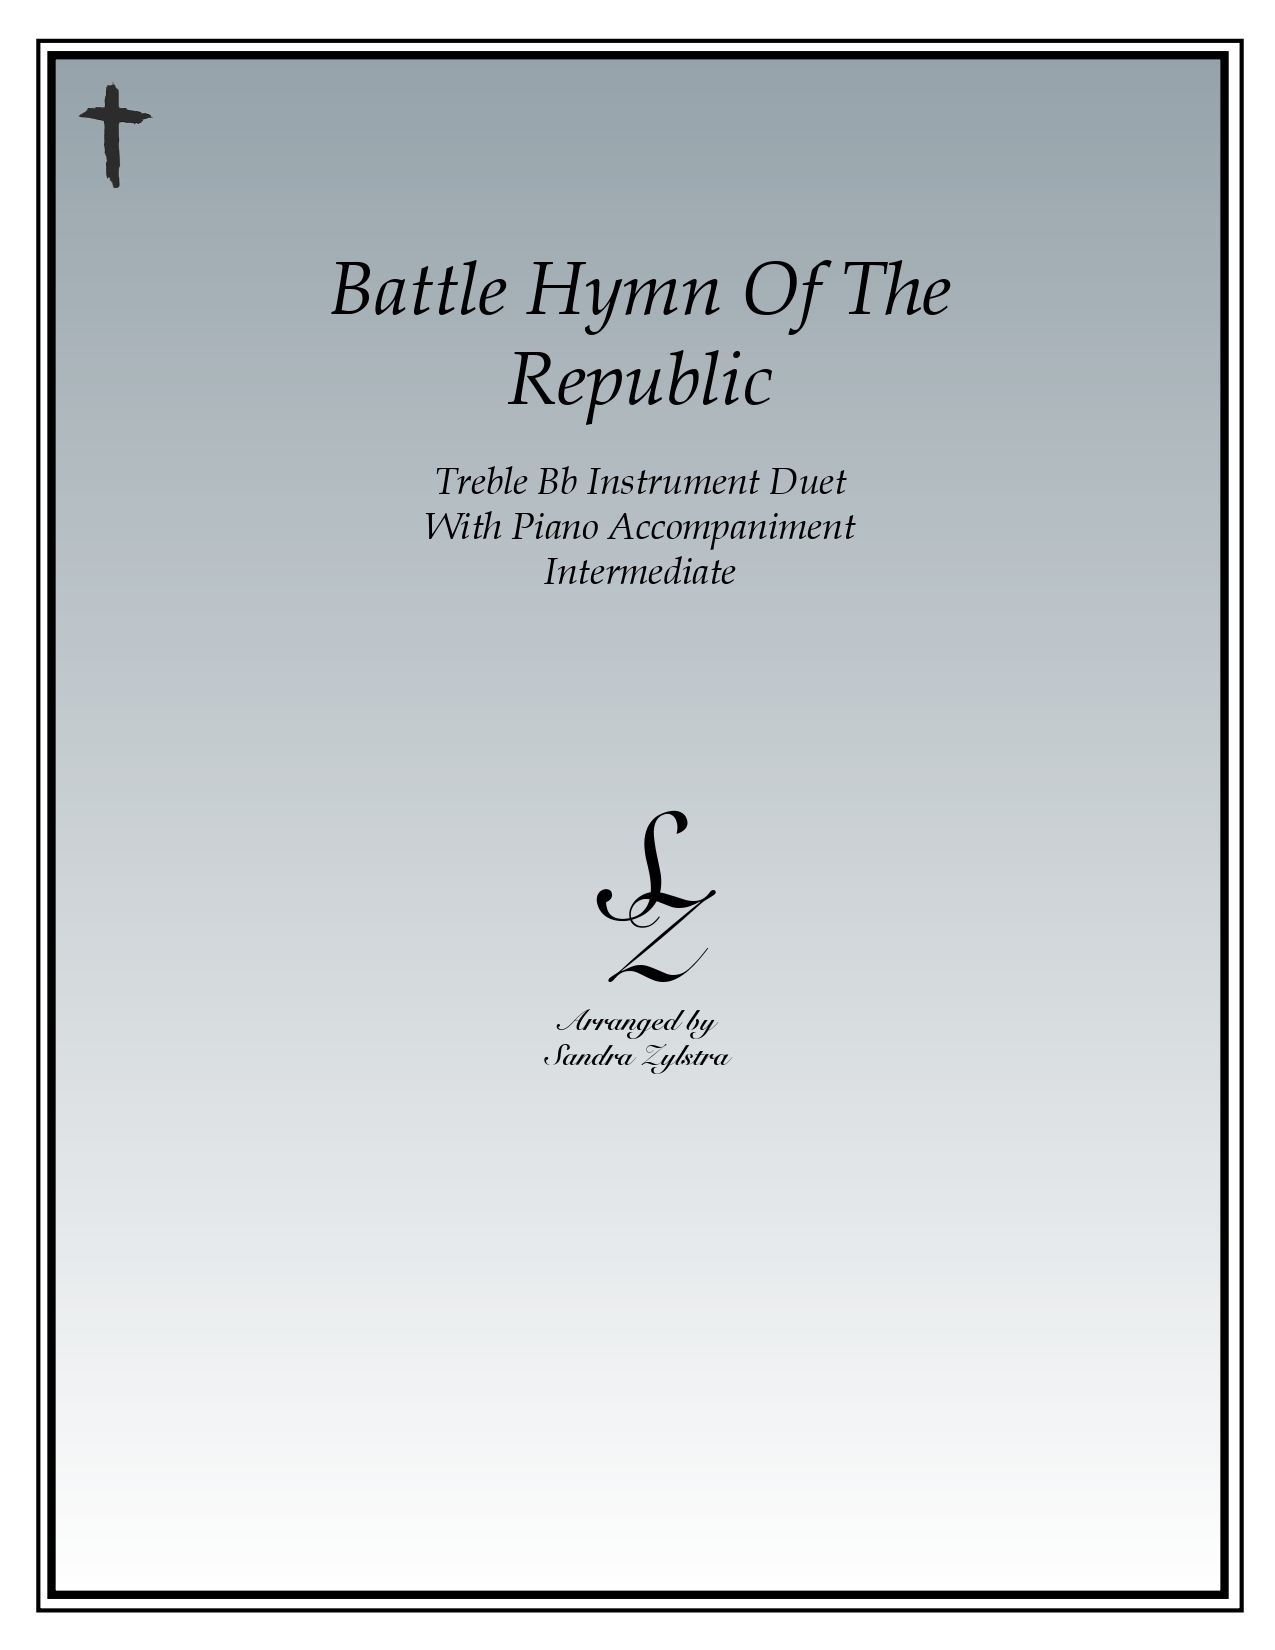 Battle Hymn Of The Republic Bb instrument duet parts cover page 00011